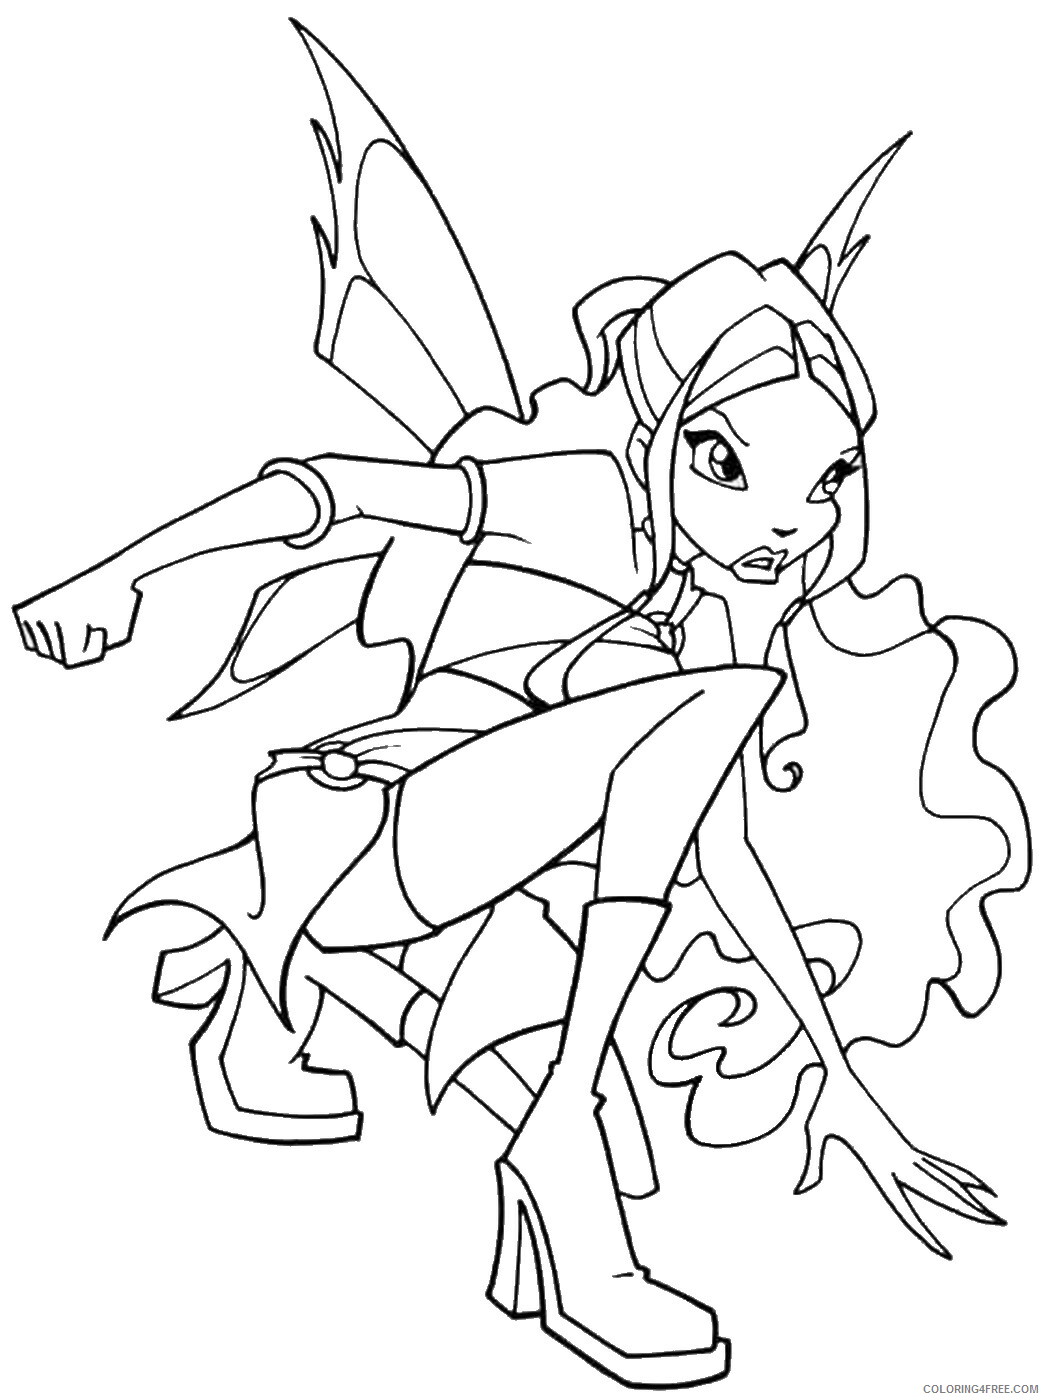 Winx Coloring Pages TV Film winx_cl_21 Printable 2020 11383 Coloring4free